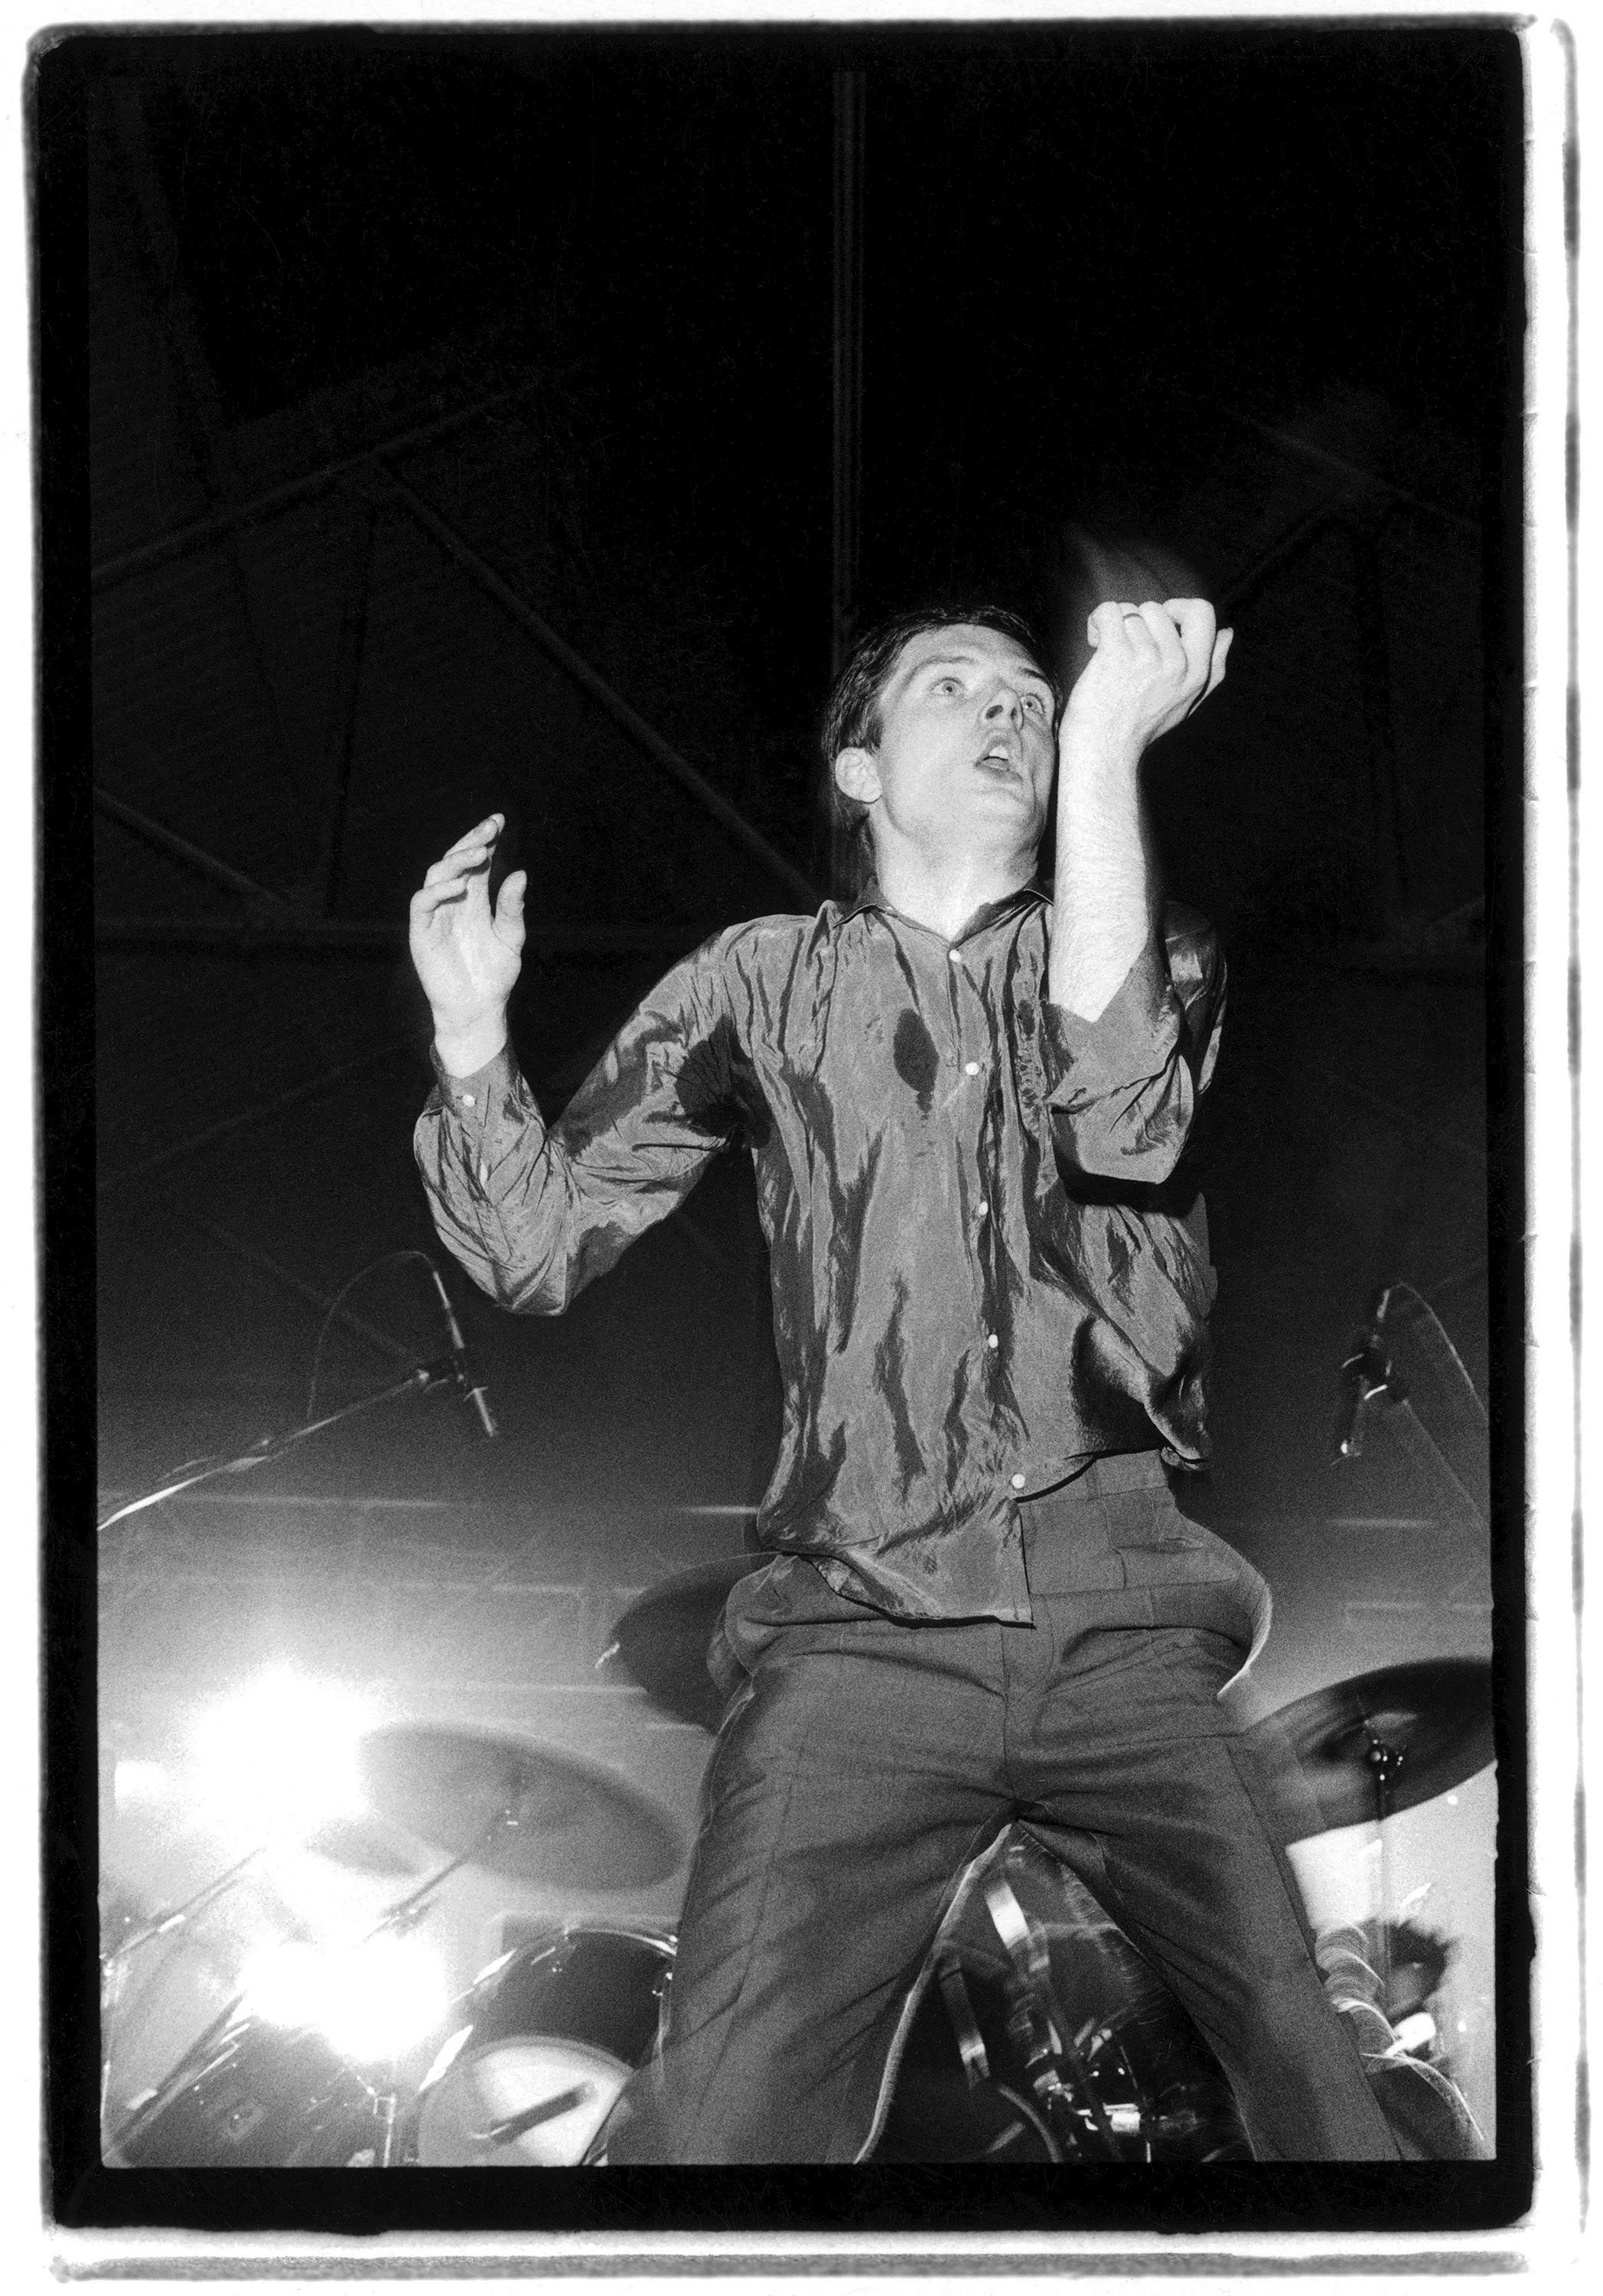 Ian Curtis of Joy Division by Kevin Cummins